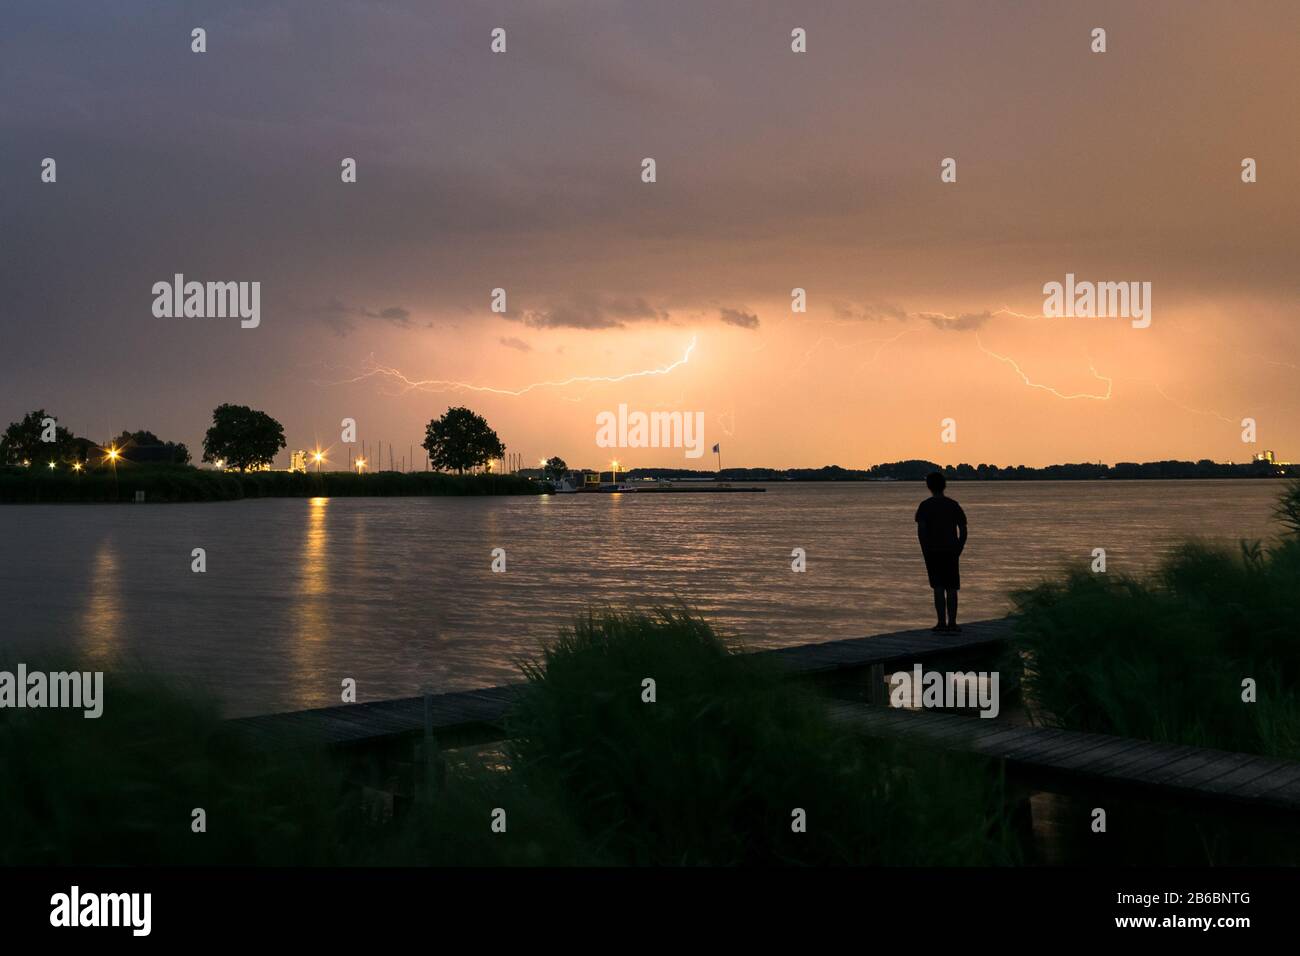 Silhouette of a boy who is watching a lightning storm over a lake in The Netherlands Stock Photo